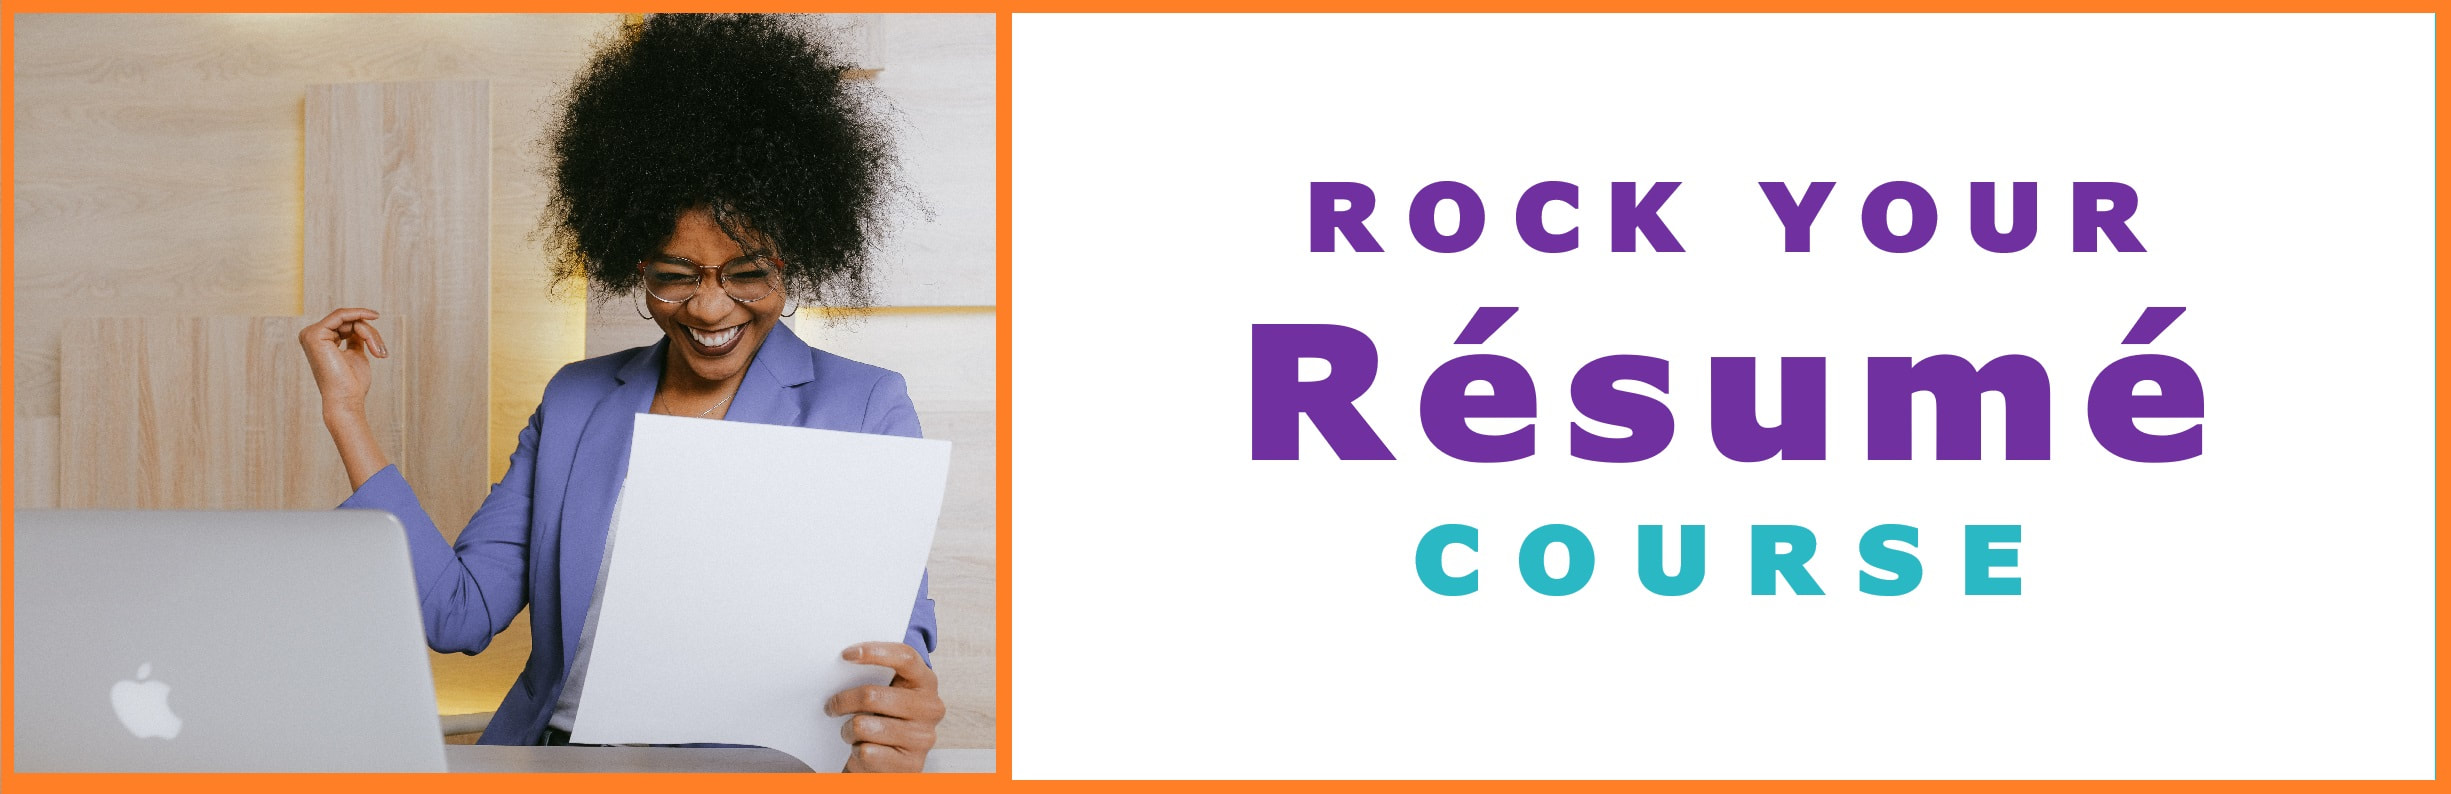 Resume Writing Course - Dr. Colleen Georges: Career Coach & Life Coach New  Jersey NJ | Resume Writer NJ | Career Coaching & Life Coaching